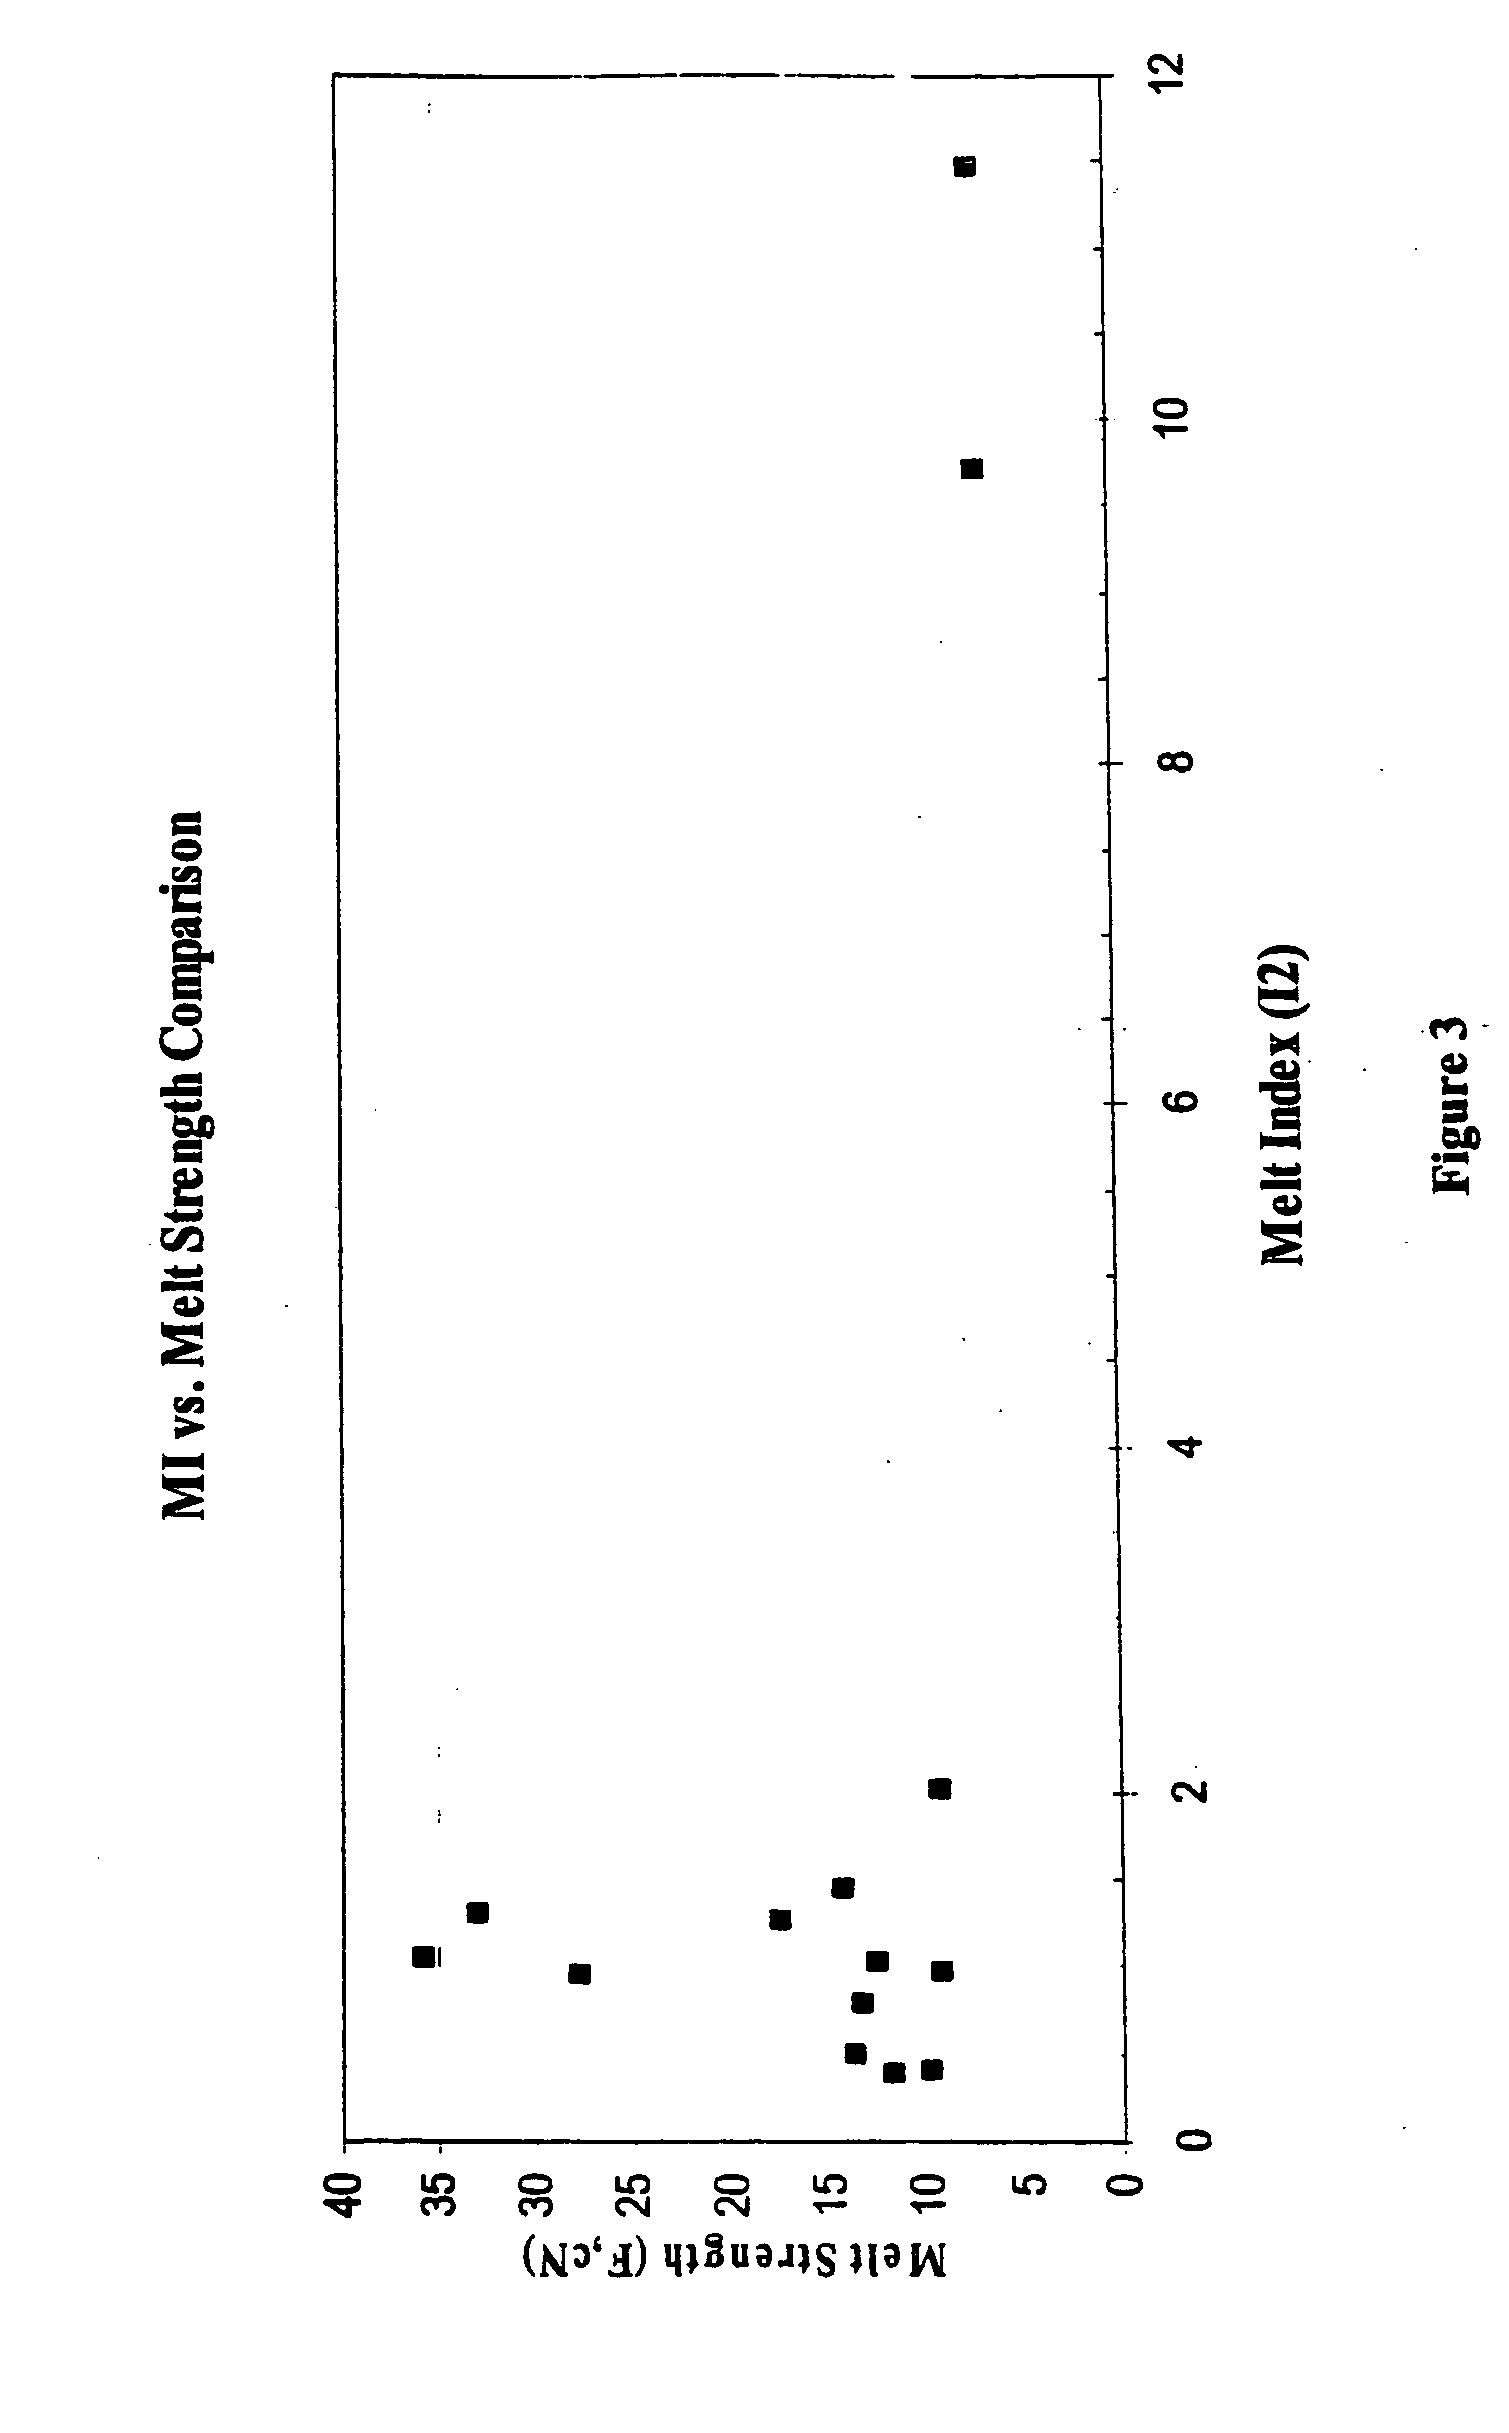 High melt strength polymers and method of making same